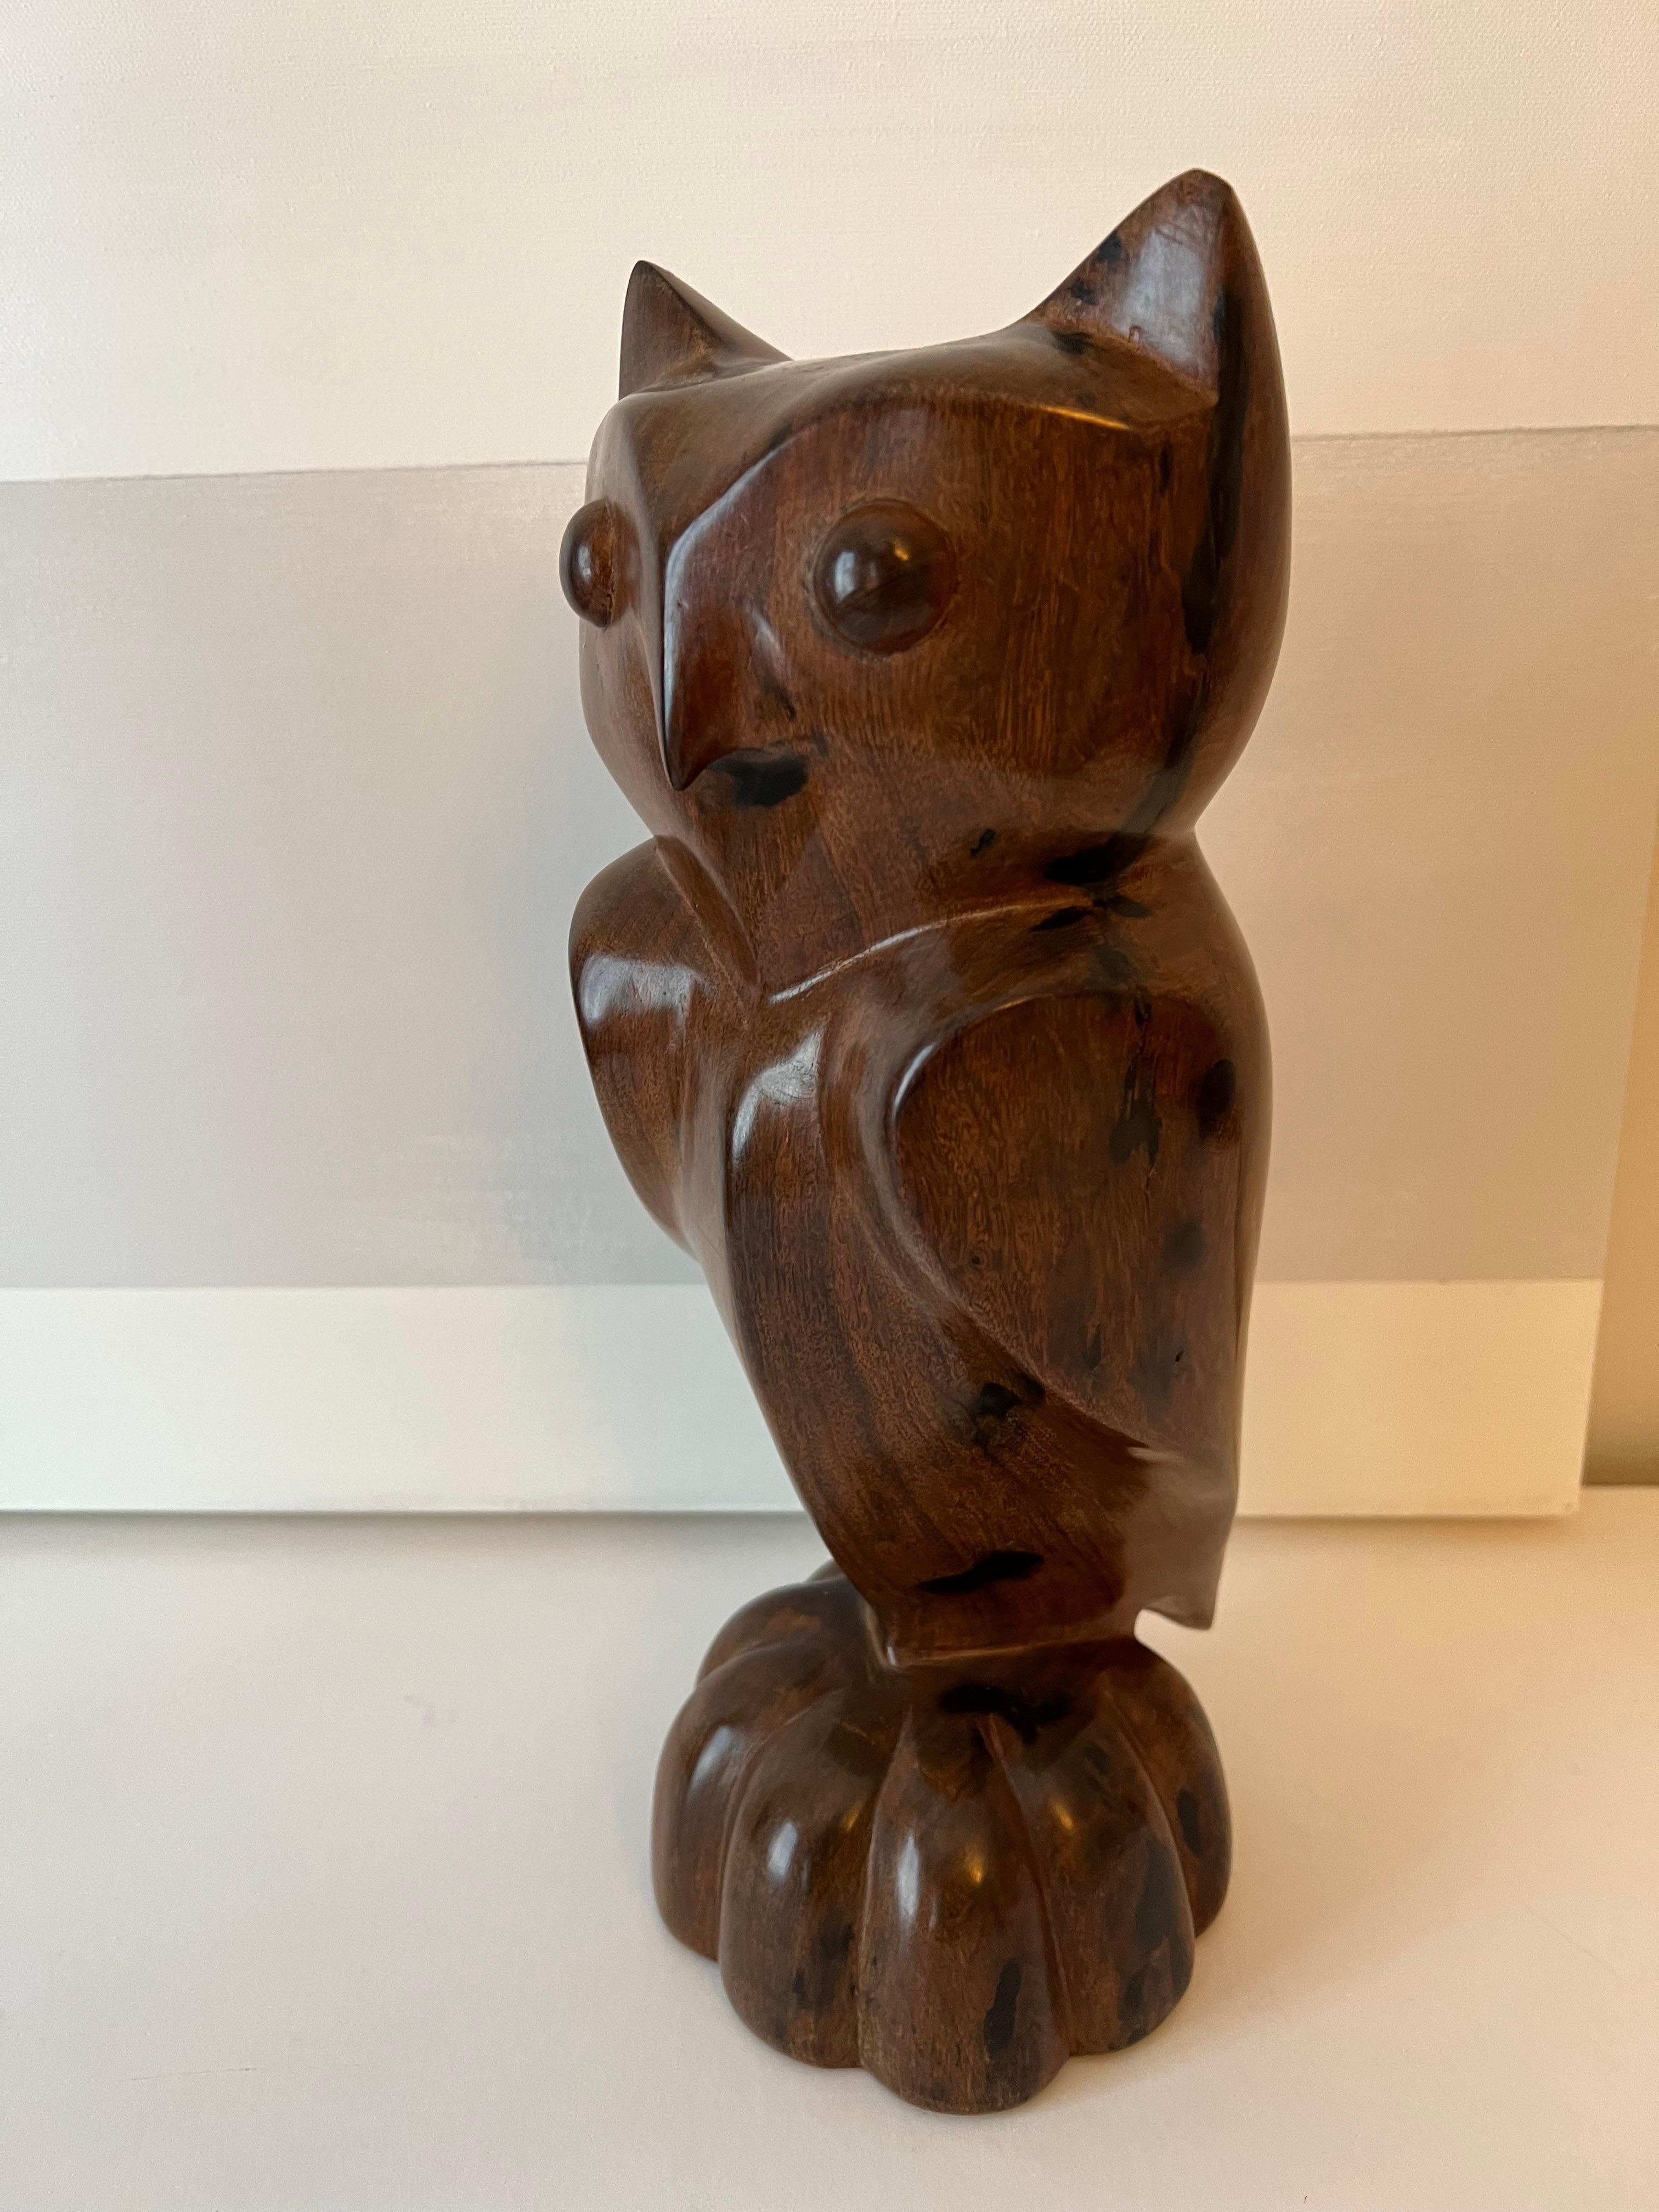 Hand-carved owl sculpture of hardwood - perfectly carved and finished to a rich lustrous sheen. Perfect for any shelf as a focal point or added to books and art.